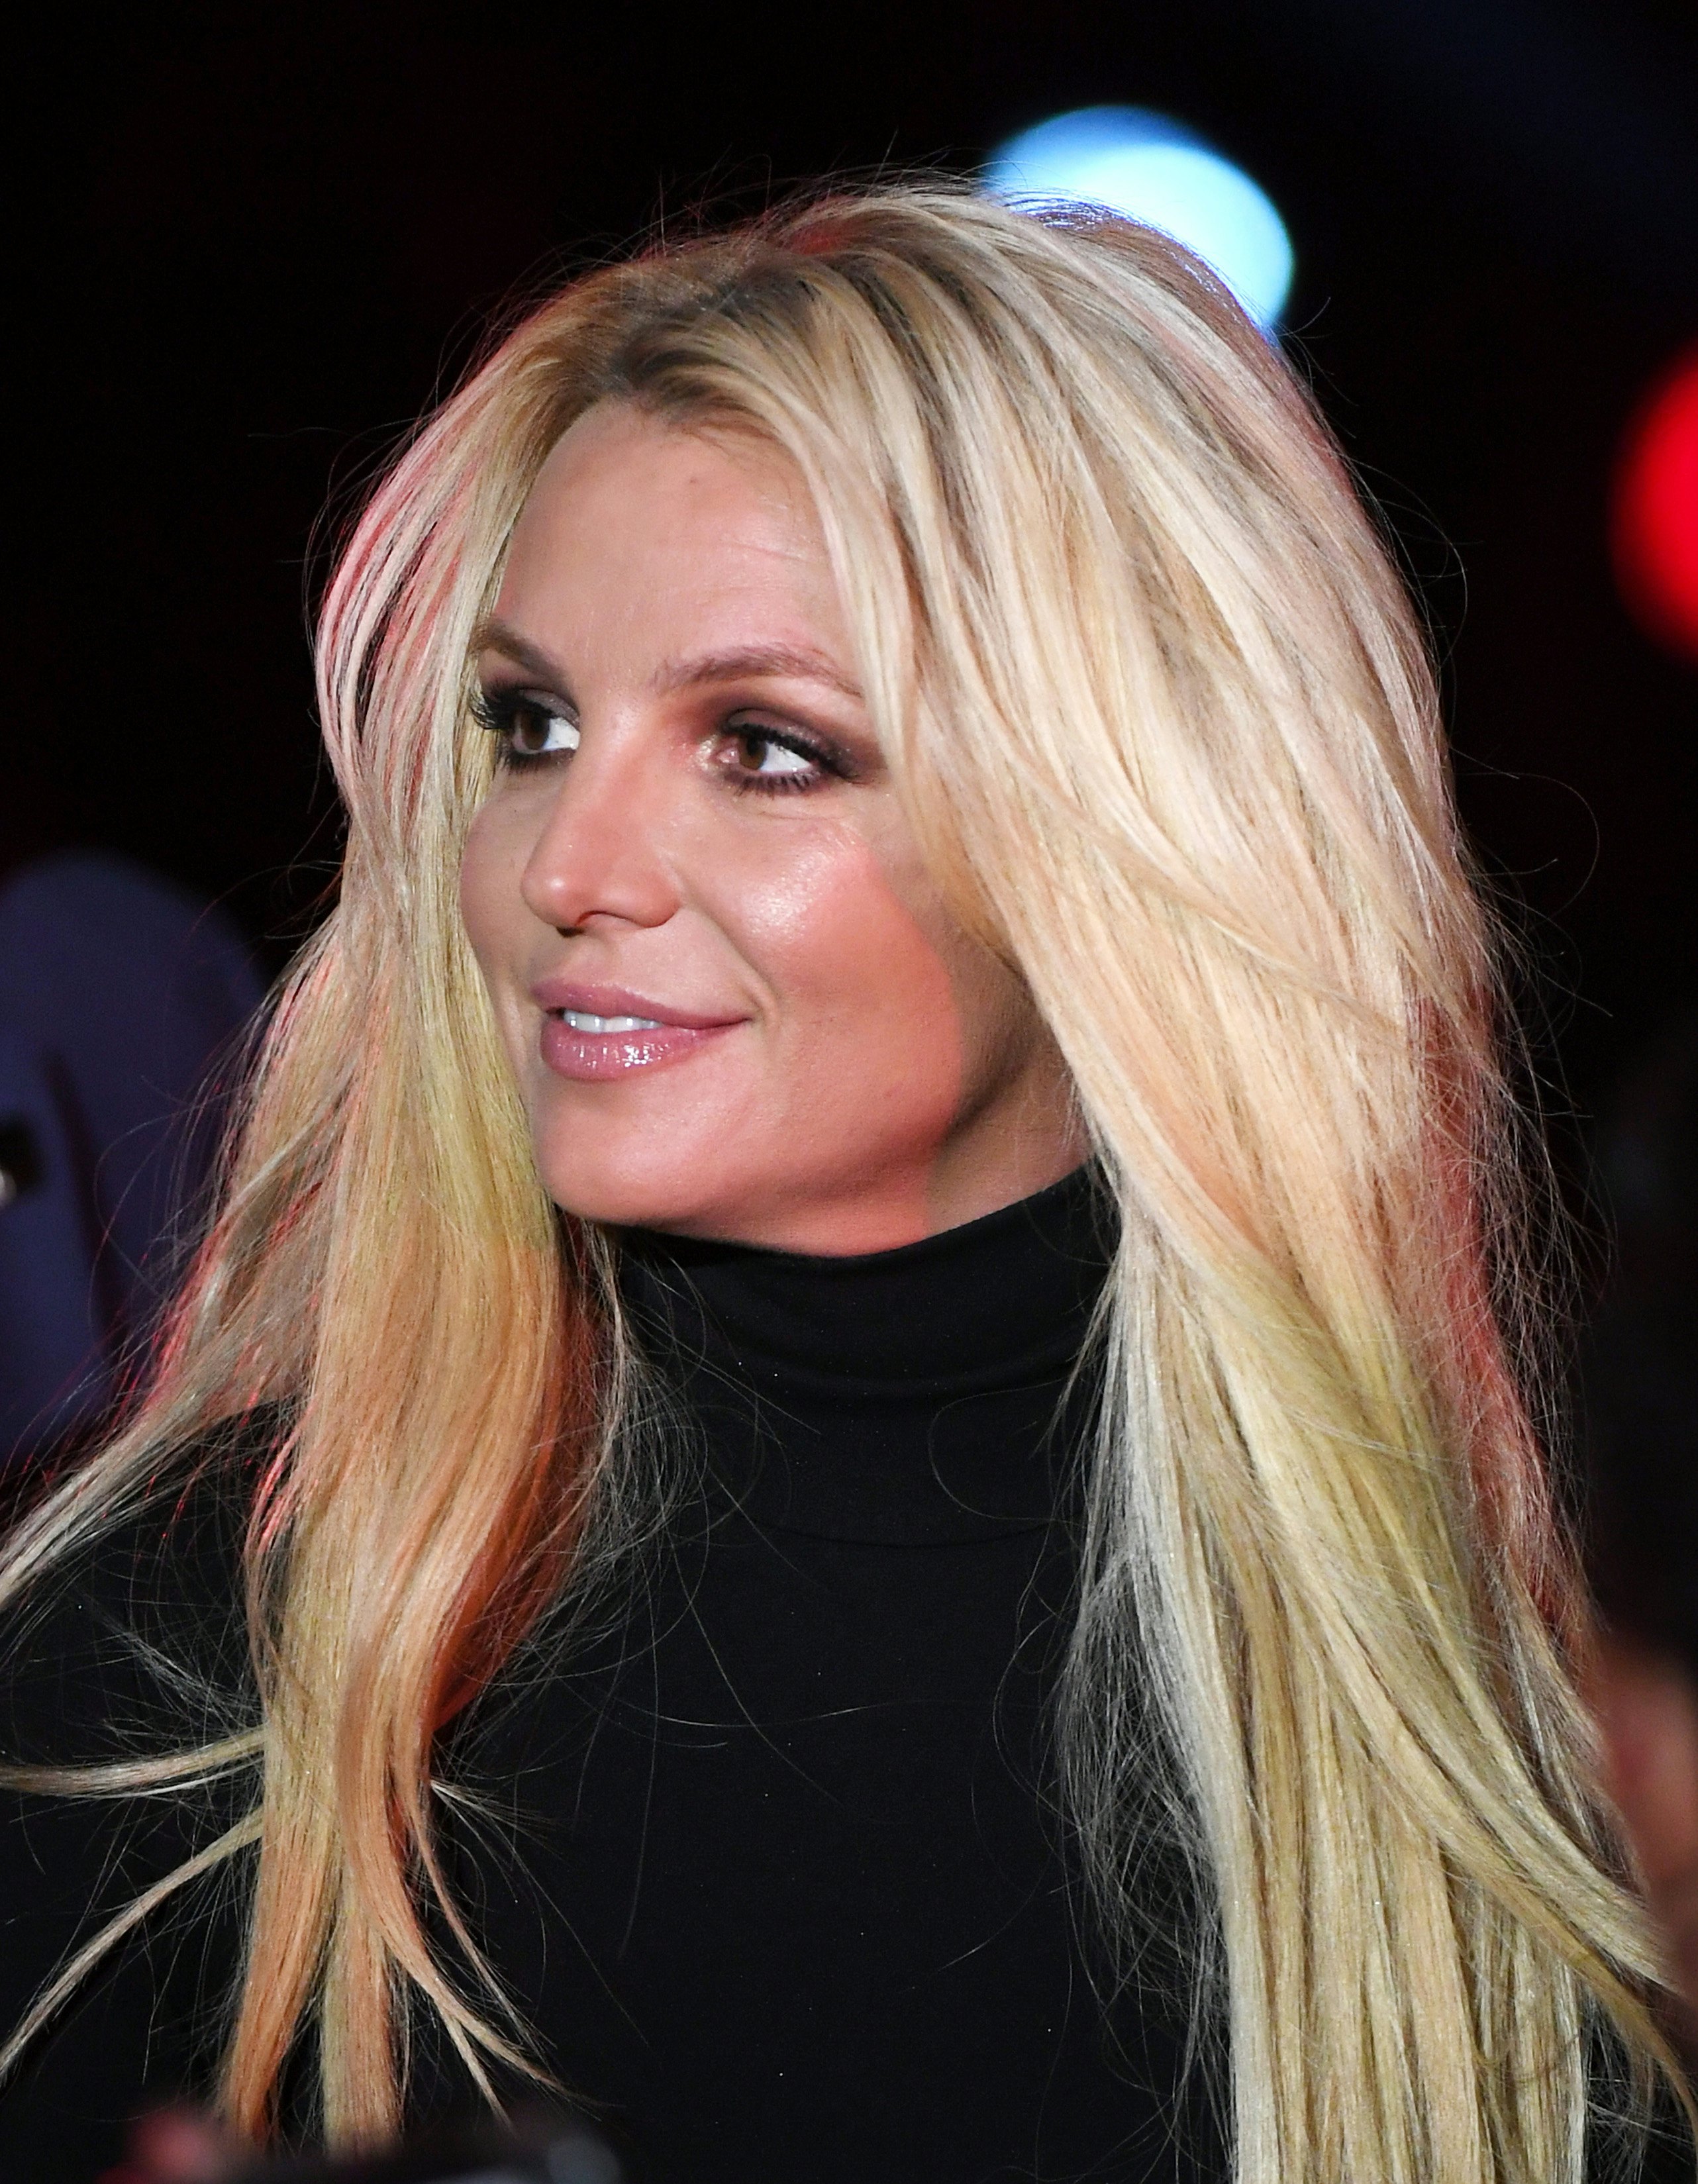 Photos Of Britney Spears Brown Hair Will Remind You Of Her Early Days